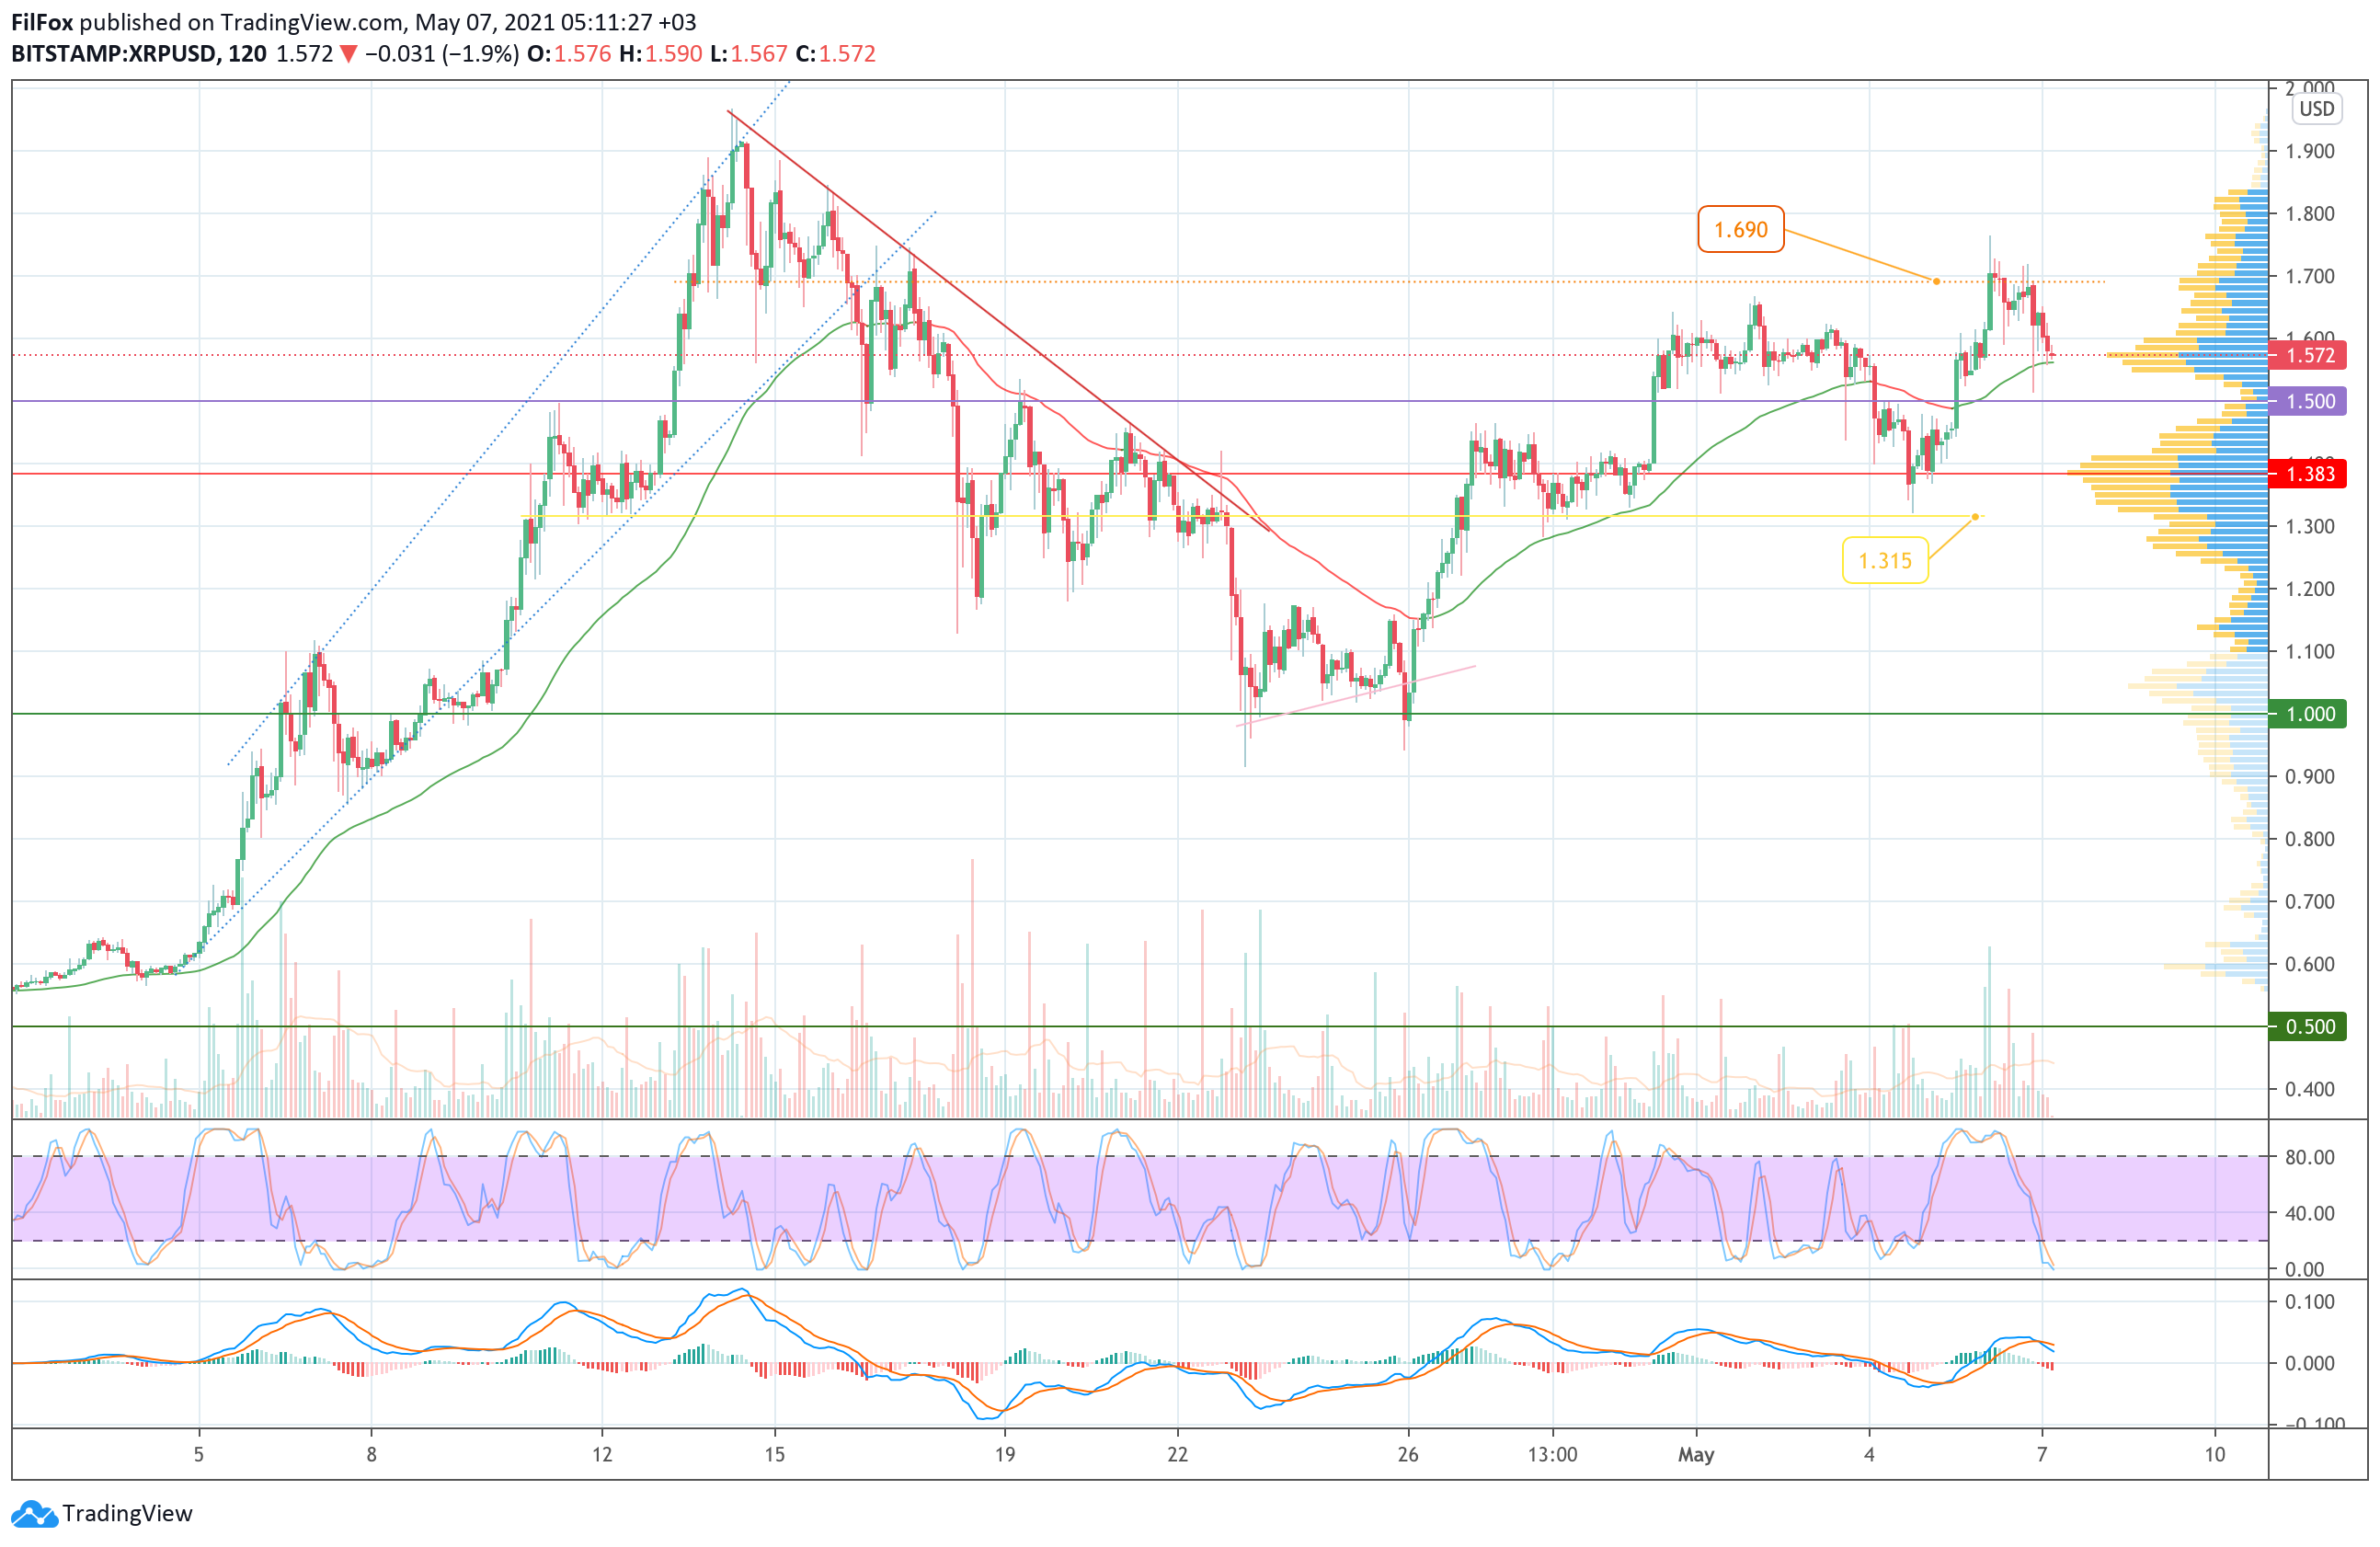 Analysis of the prices of Bitcoin, Ethereum, XRP for 05/07/2021